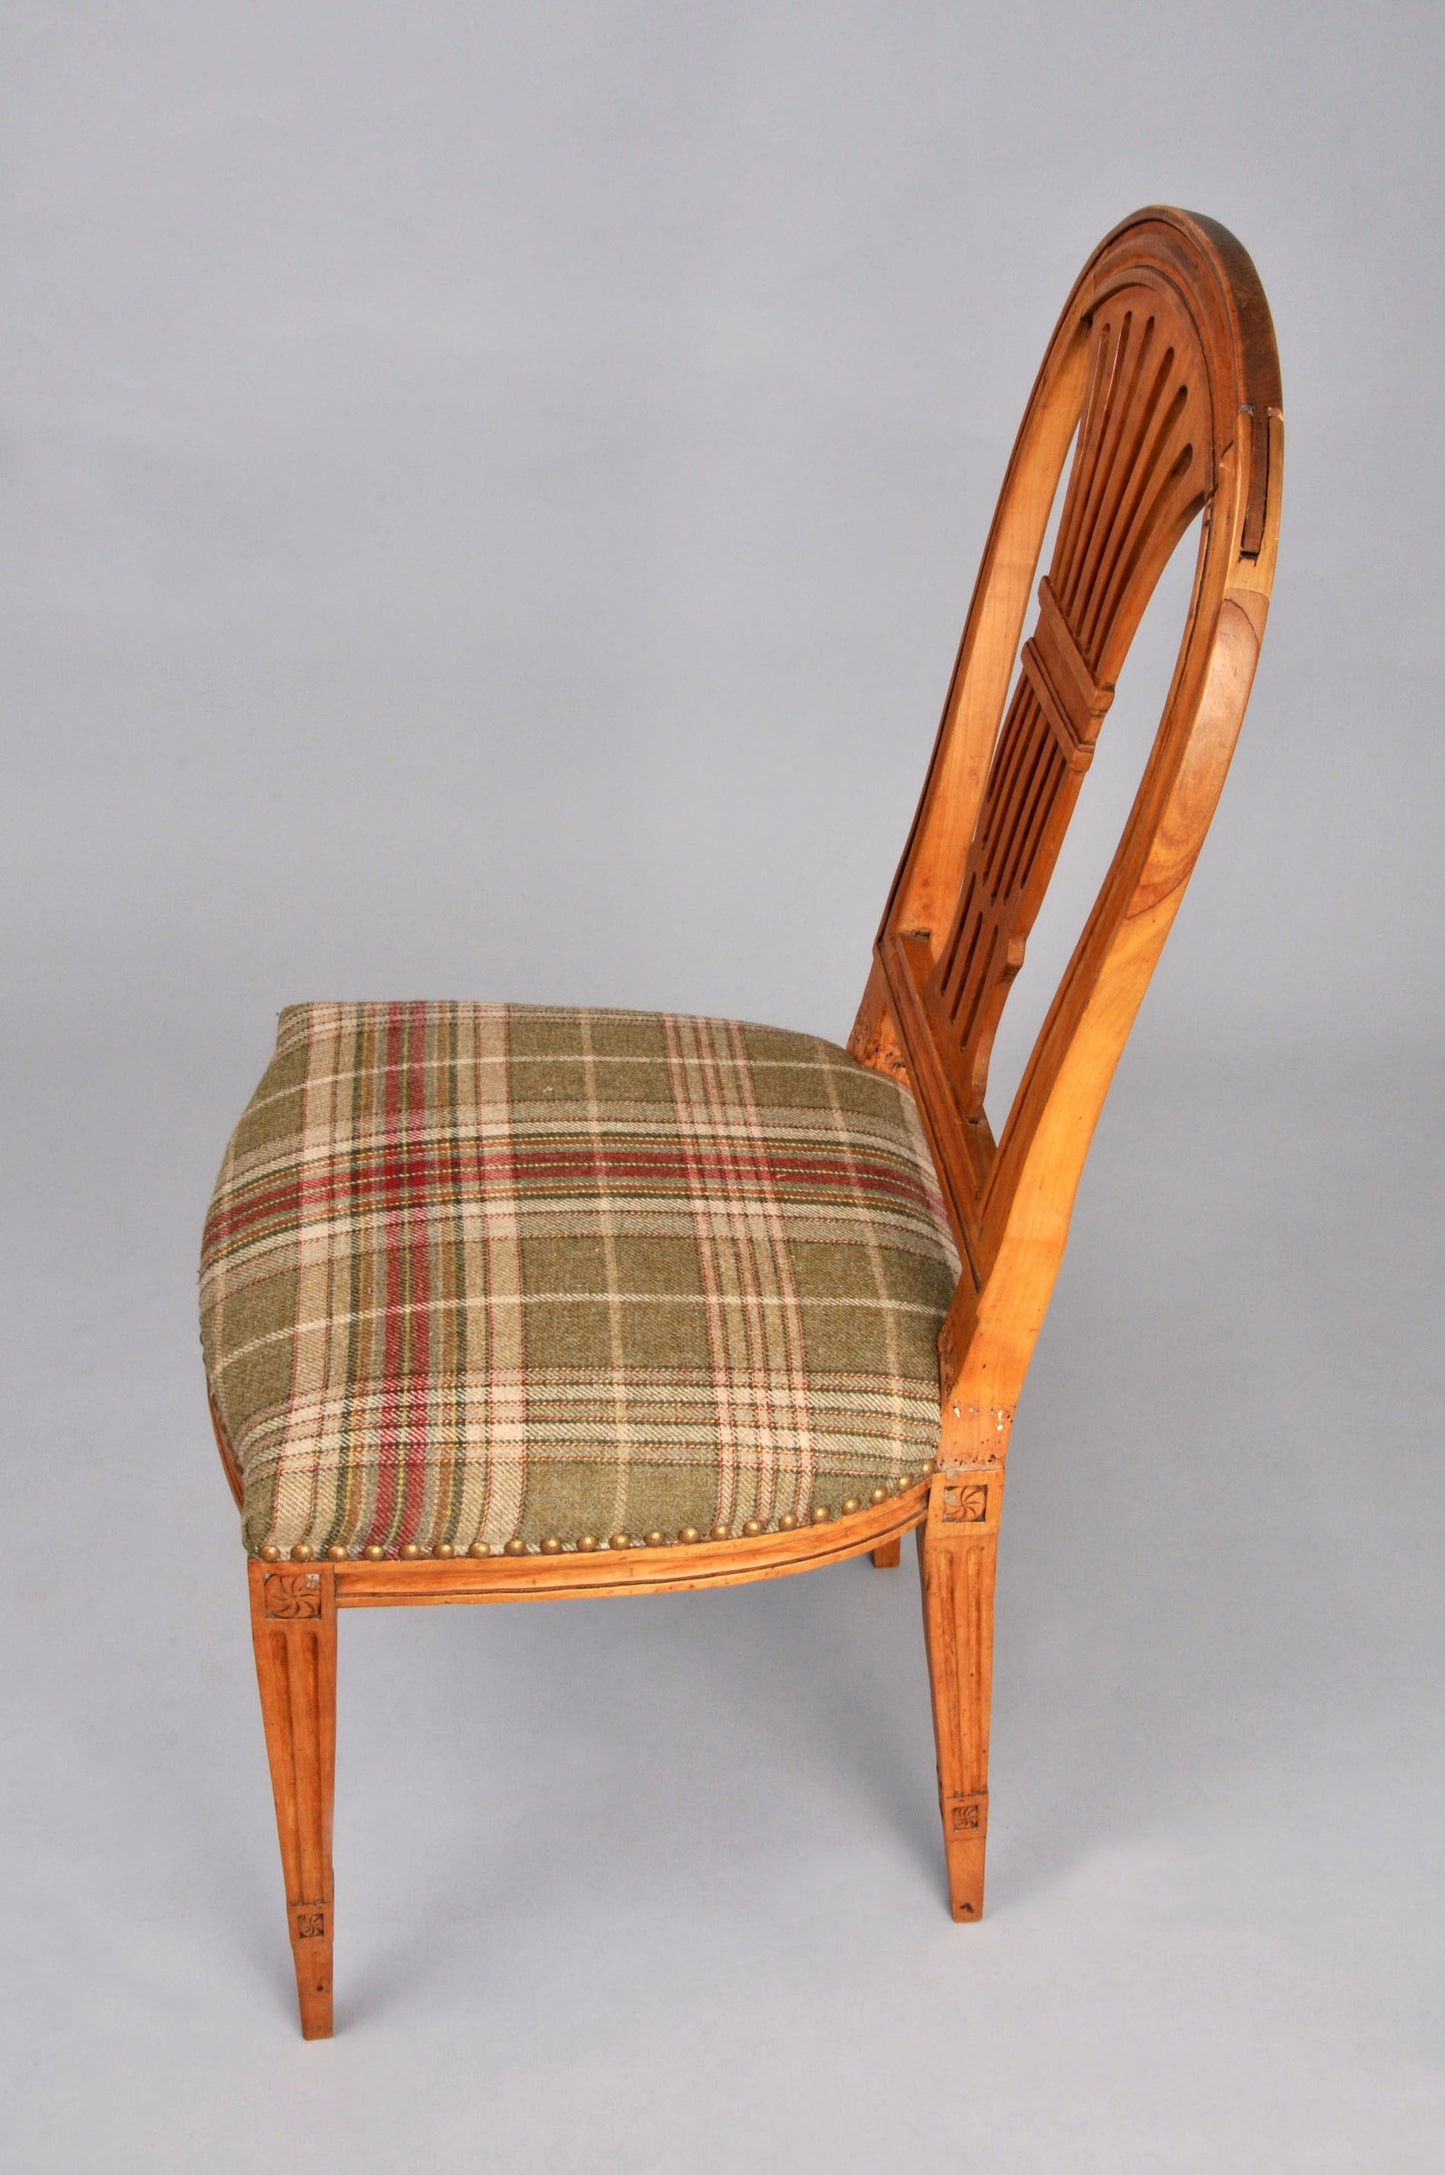 4 side chairs Louis Seize* - 18th/19th century century